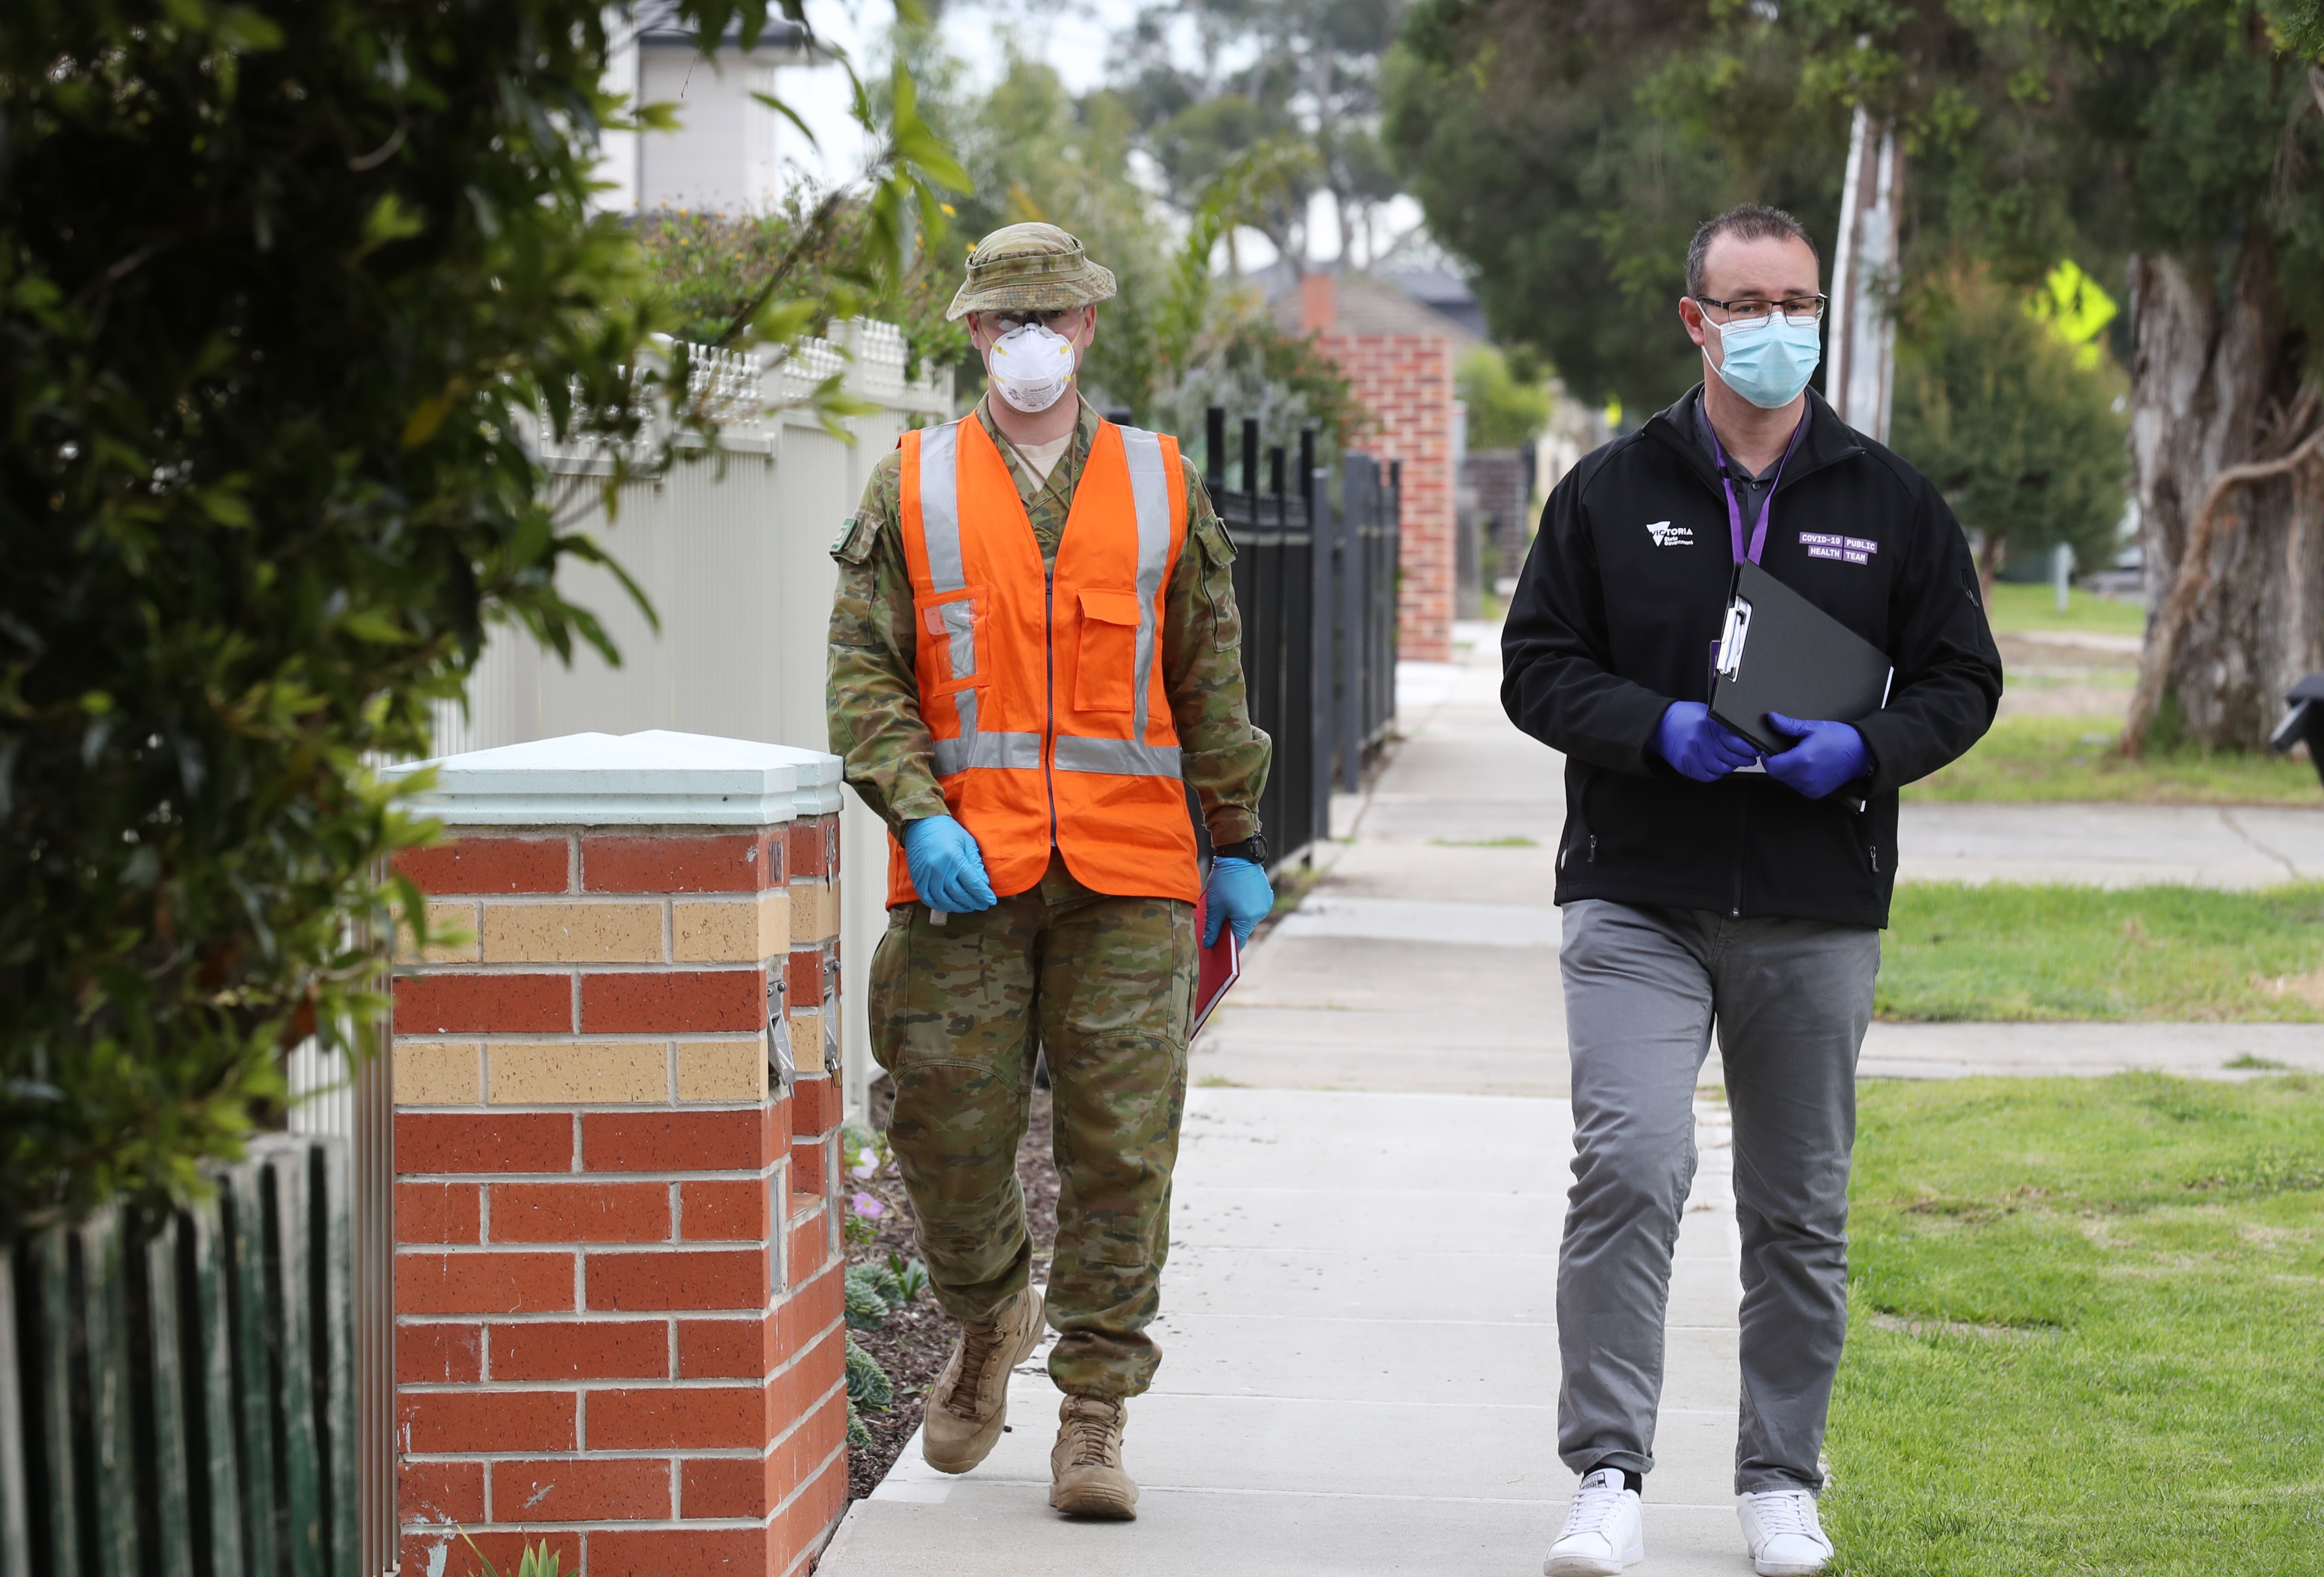 ADF personnel and public health officials doorknocking houses in St Albans.